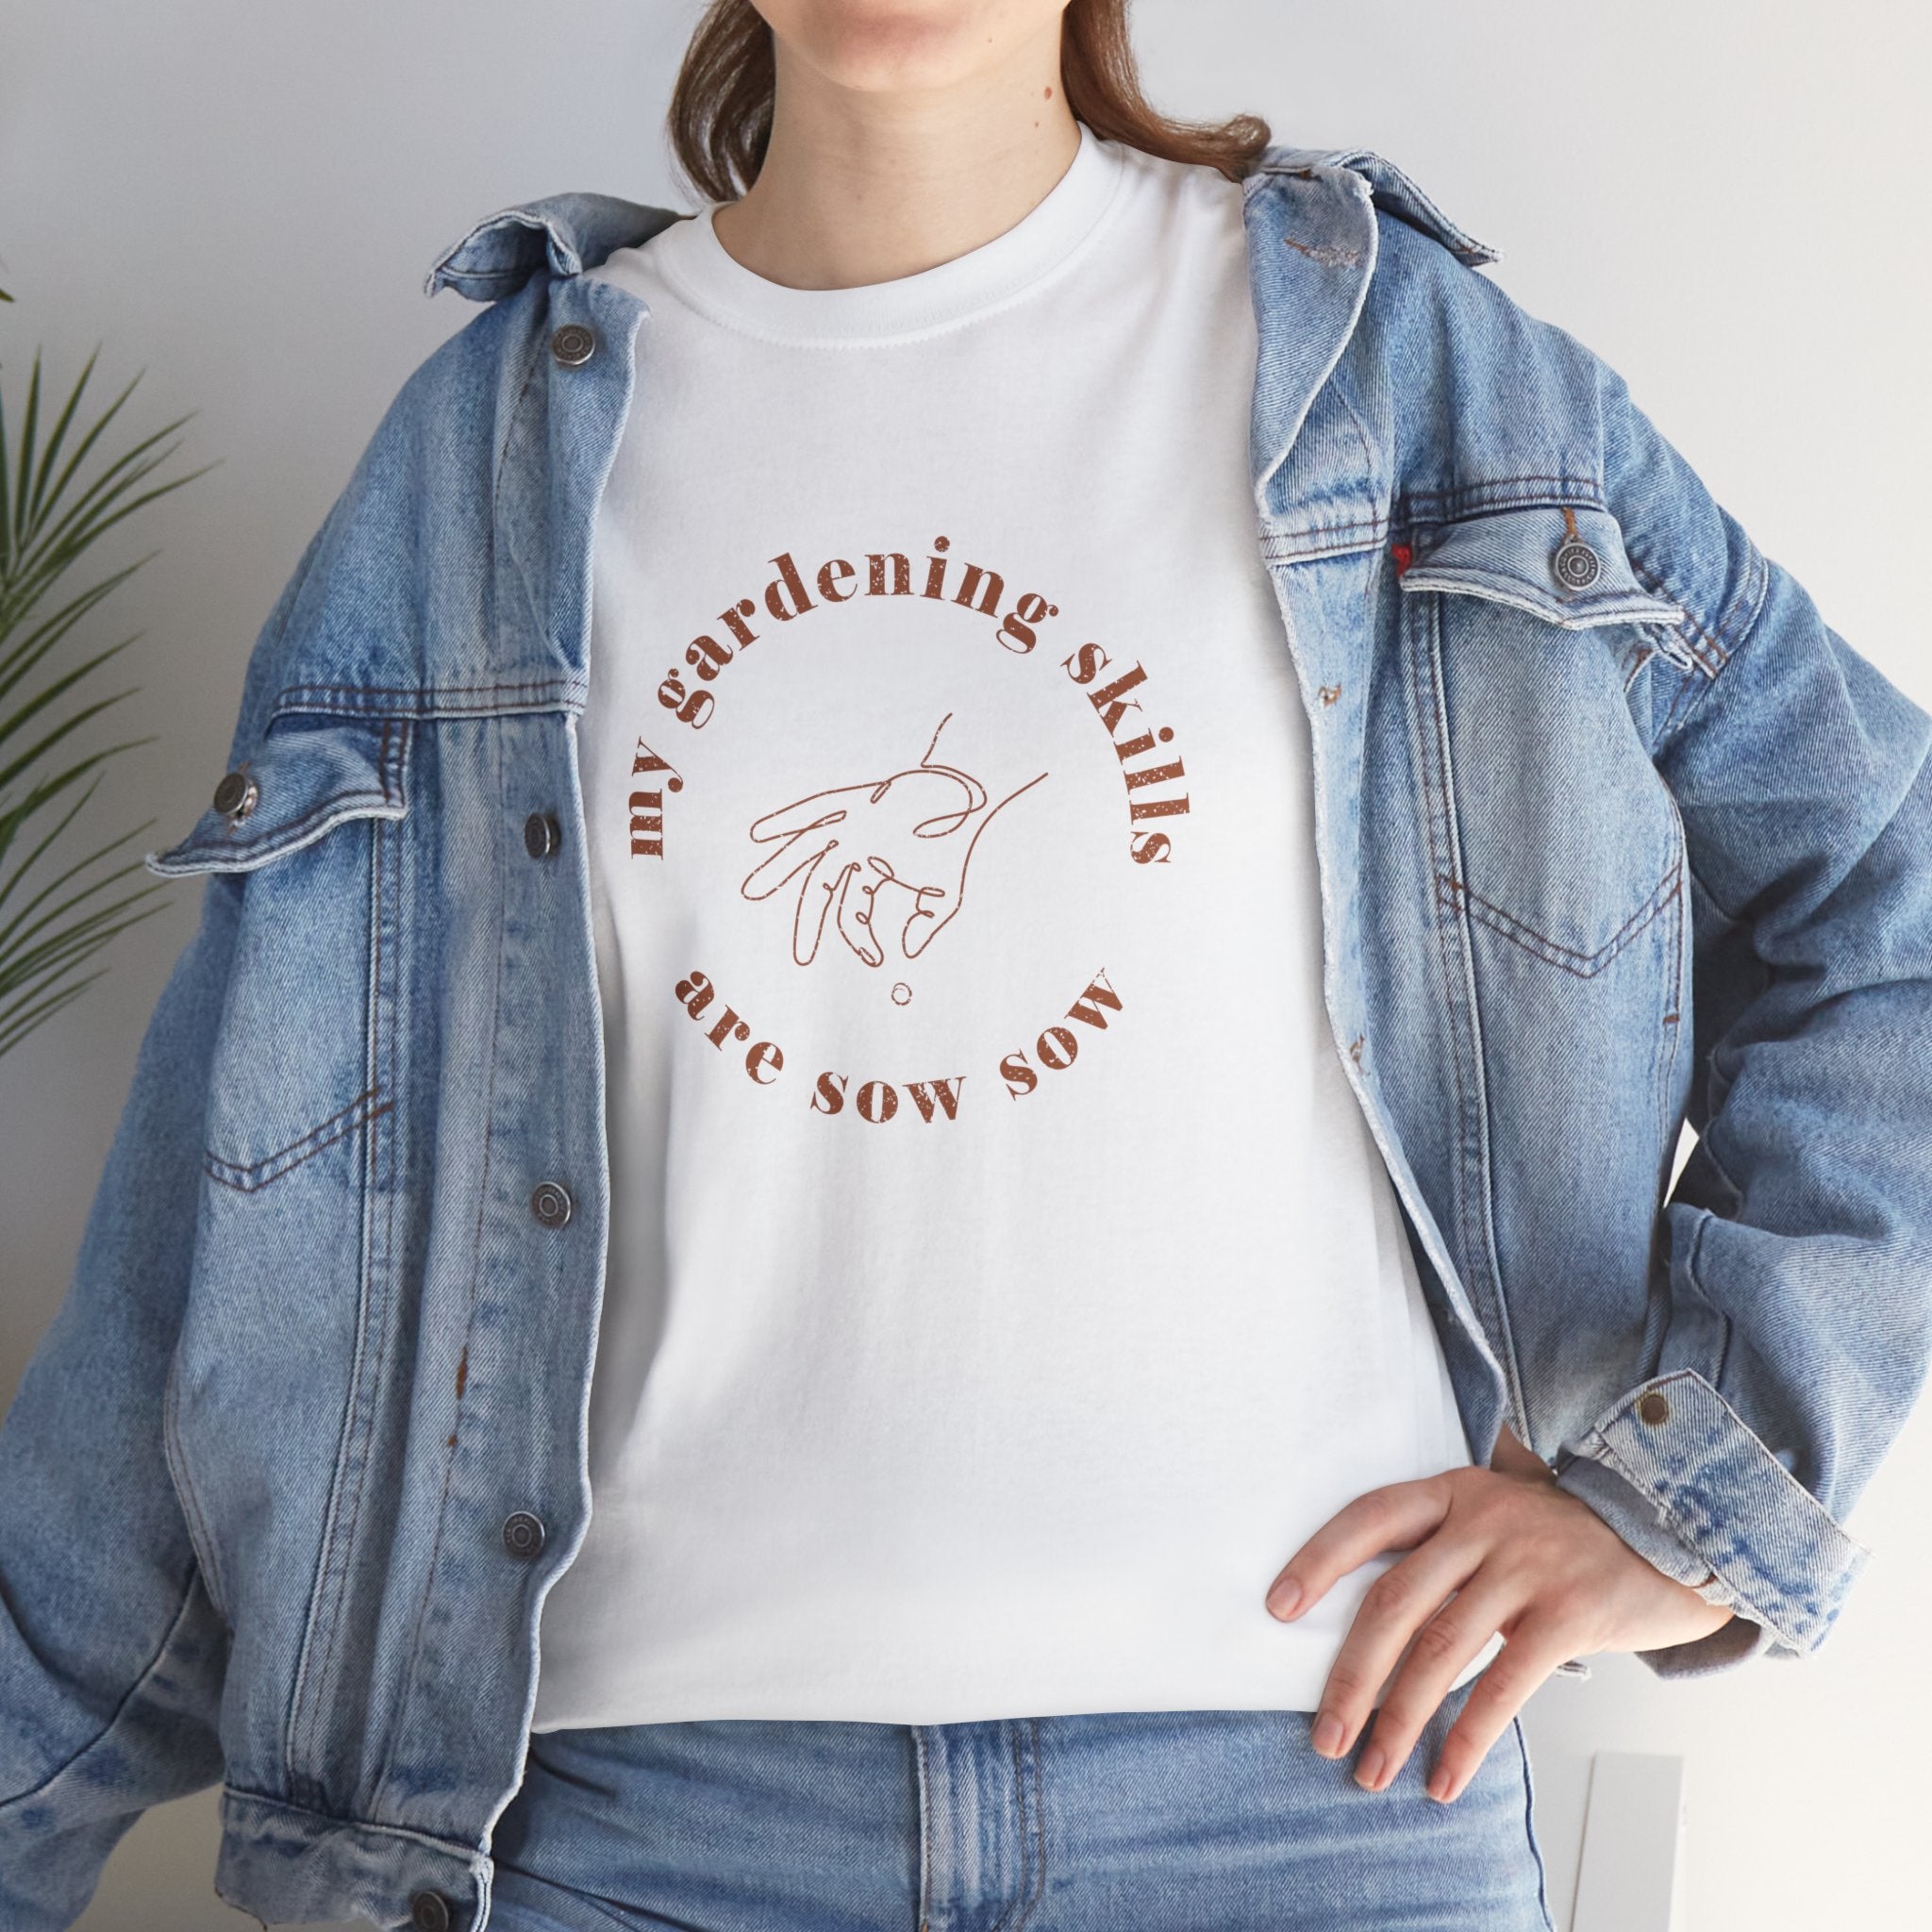 My Gardening Skills are Sow Sow T-shirt